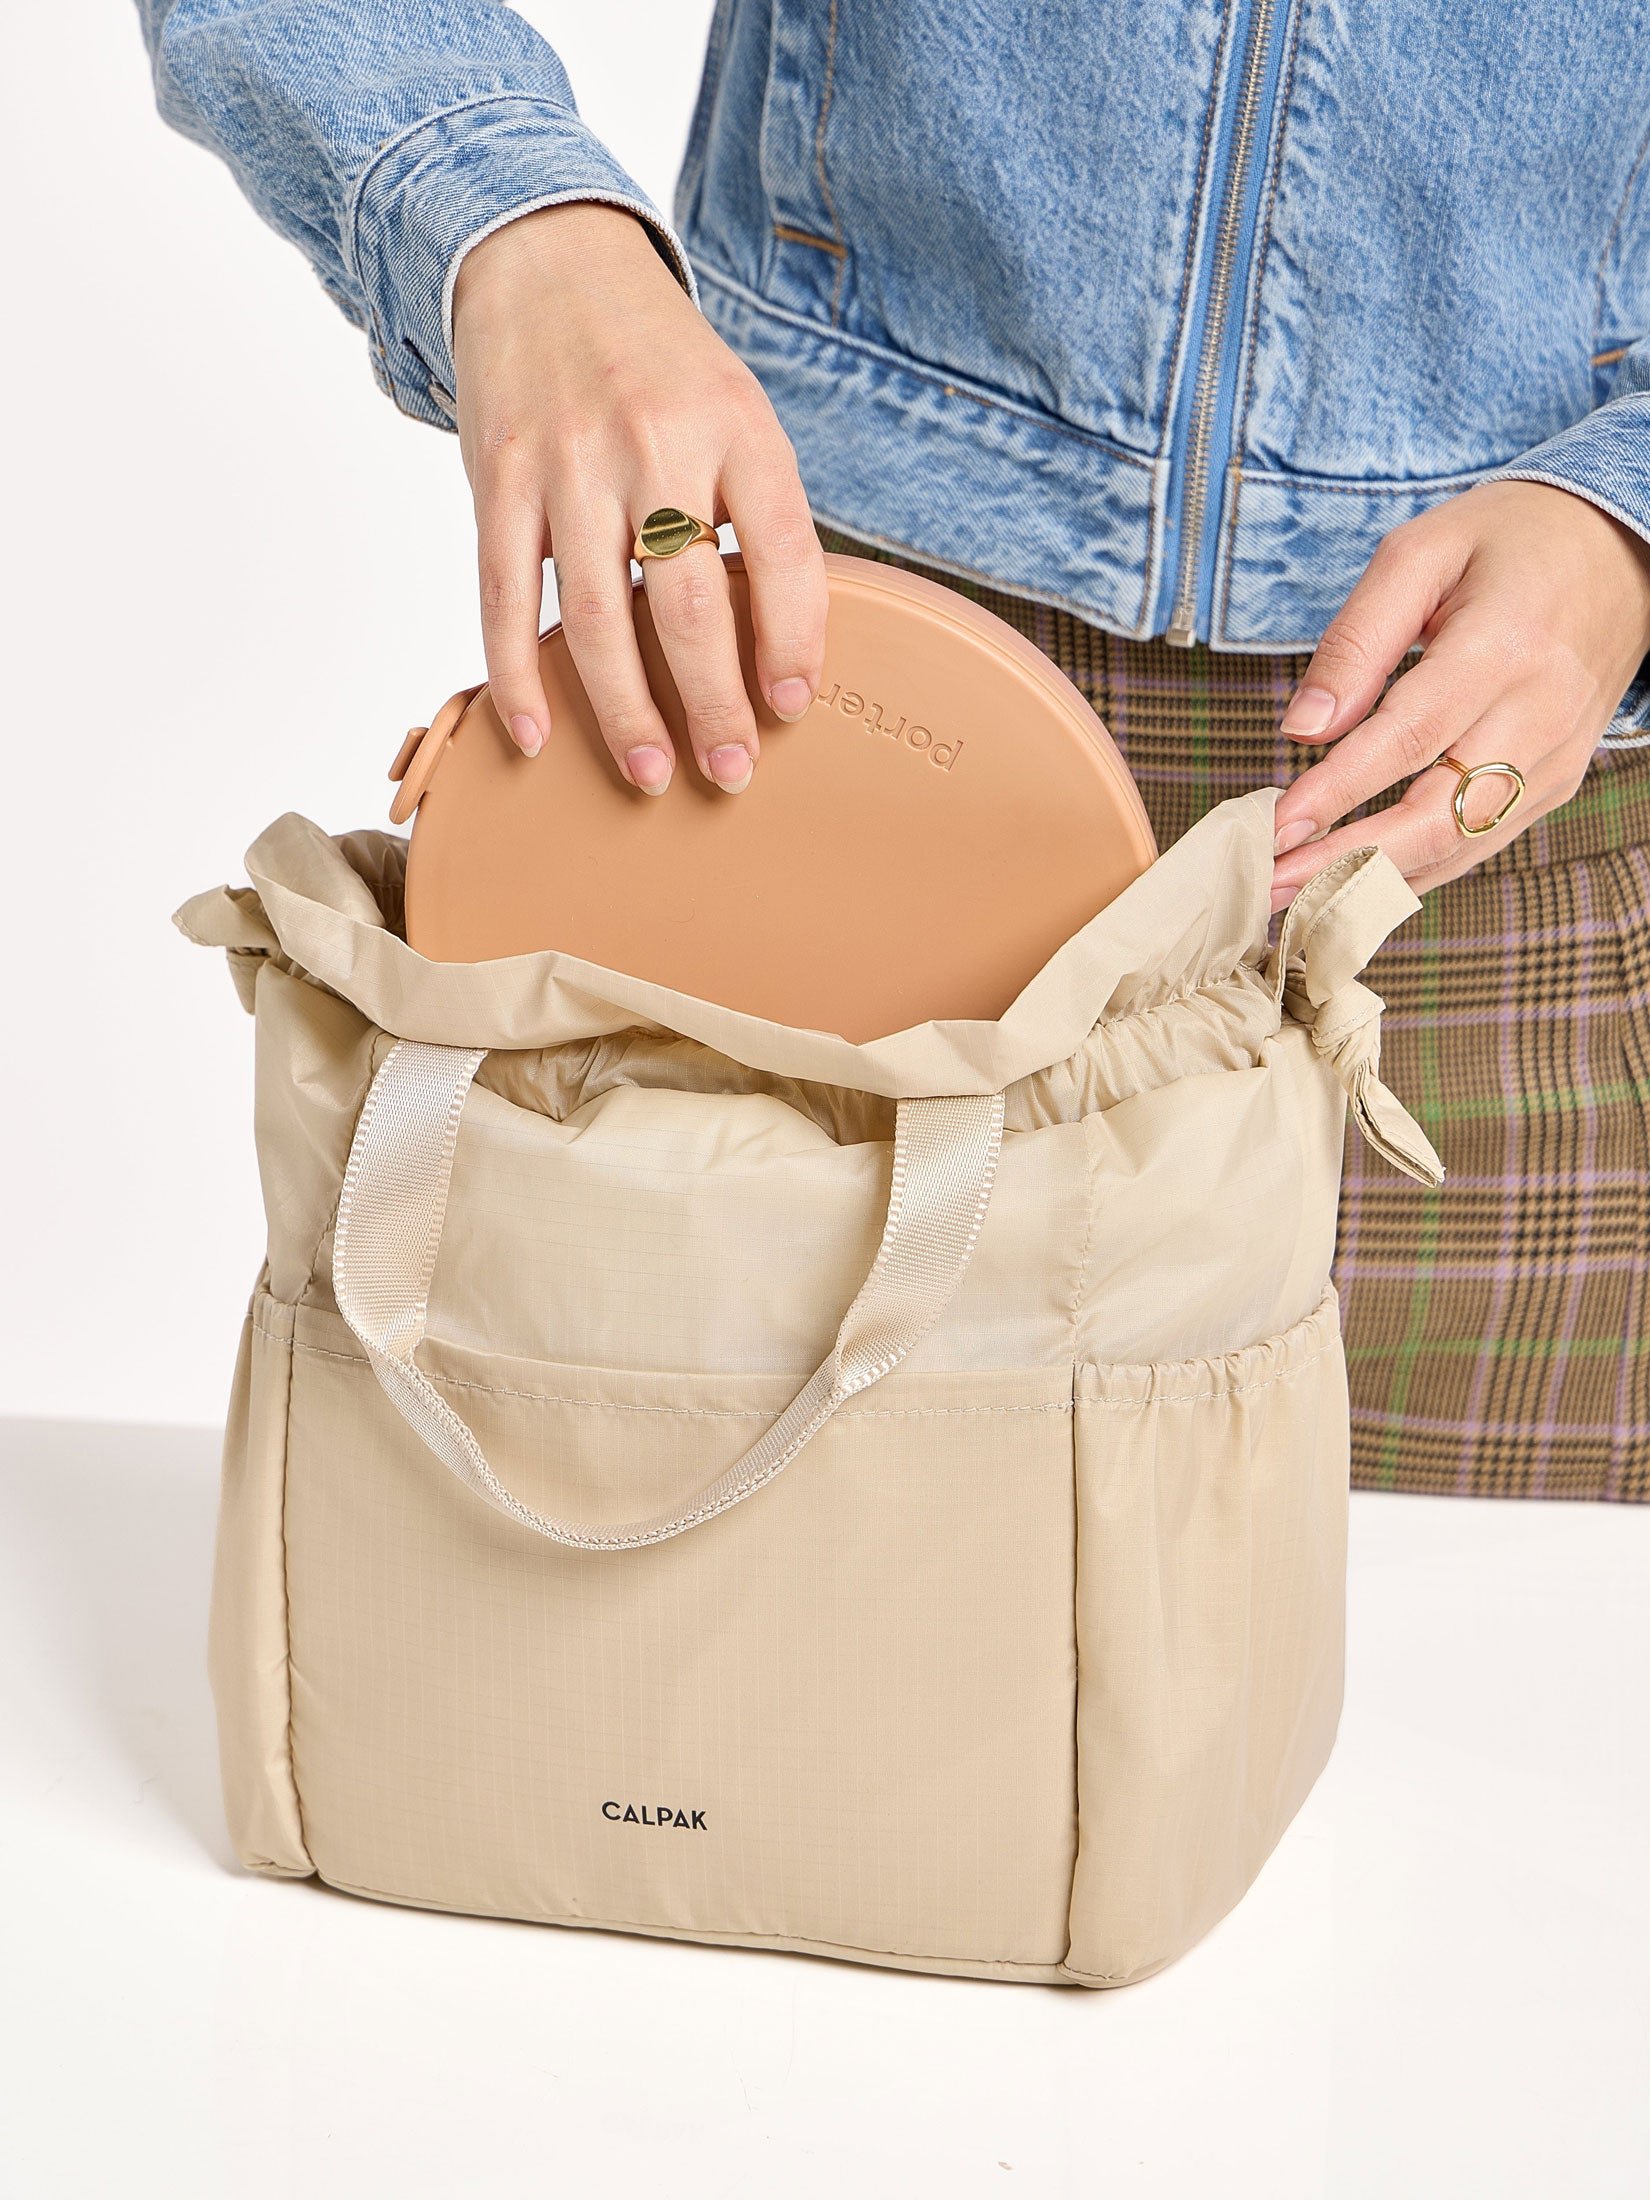 Oatmeal beige CALPAK Insulated Lunch Bag for food